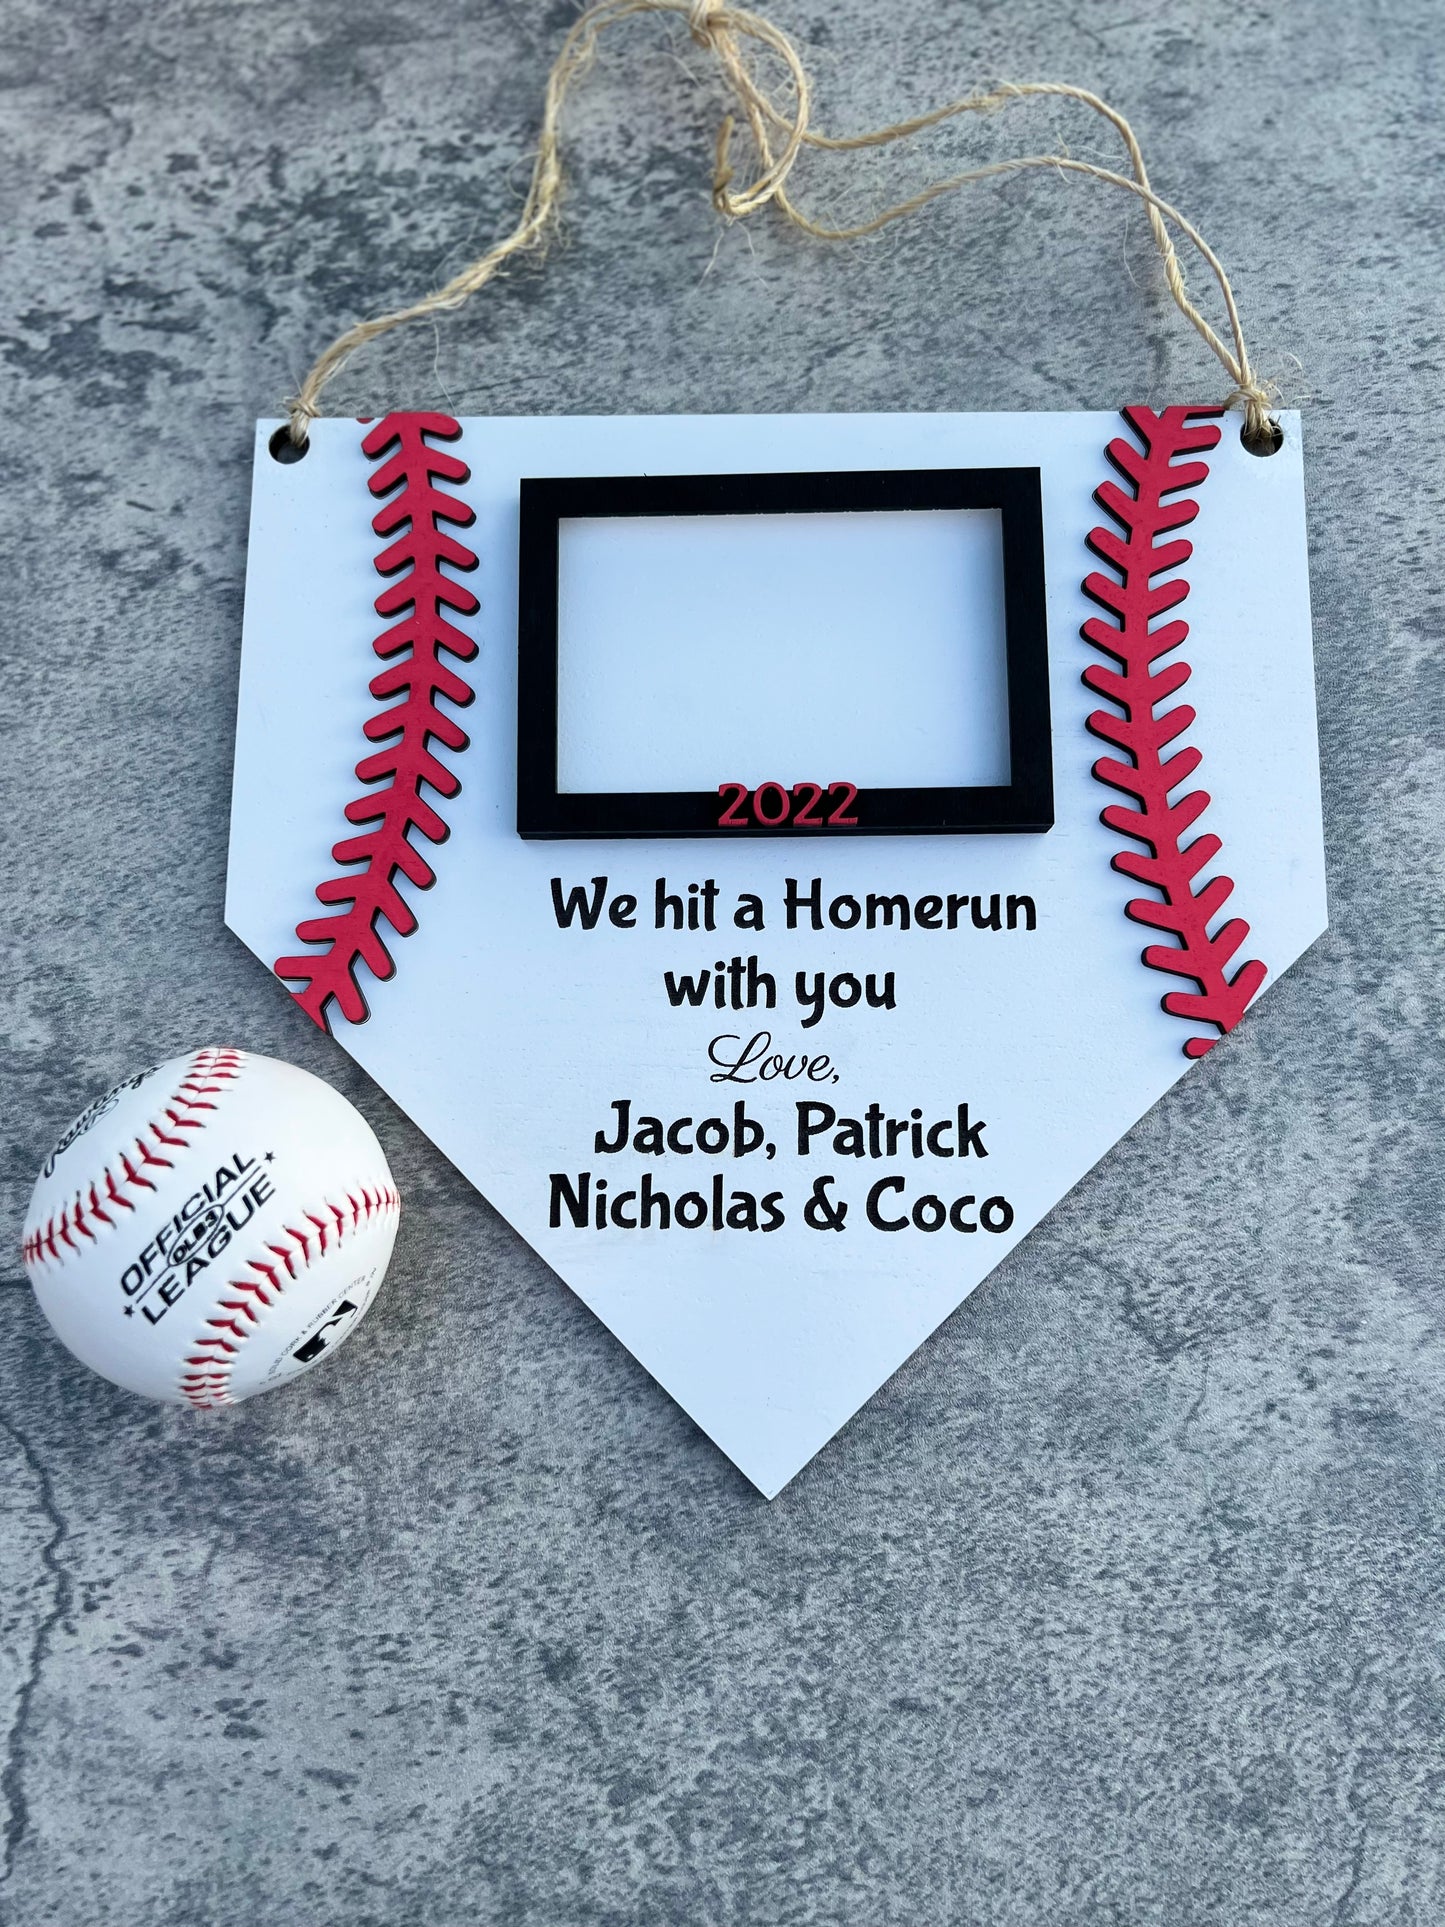 We hit a homerun - dad picture frame